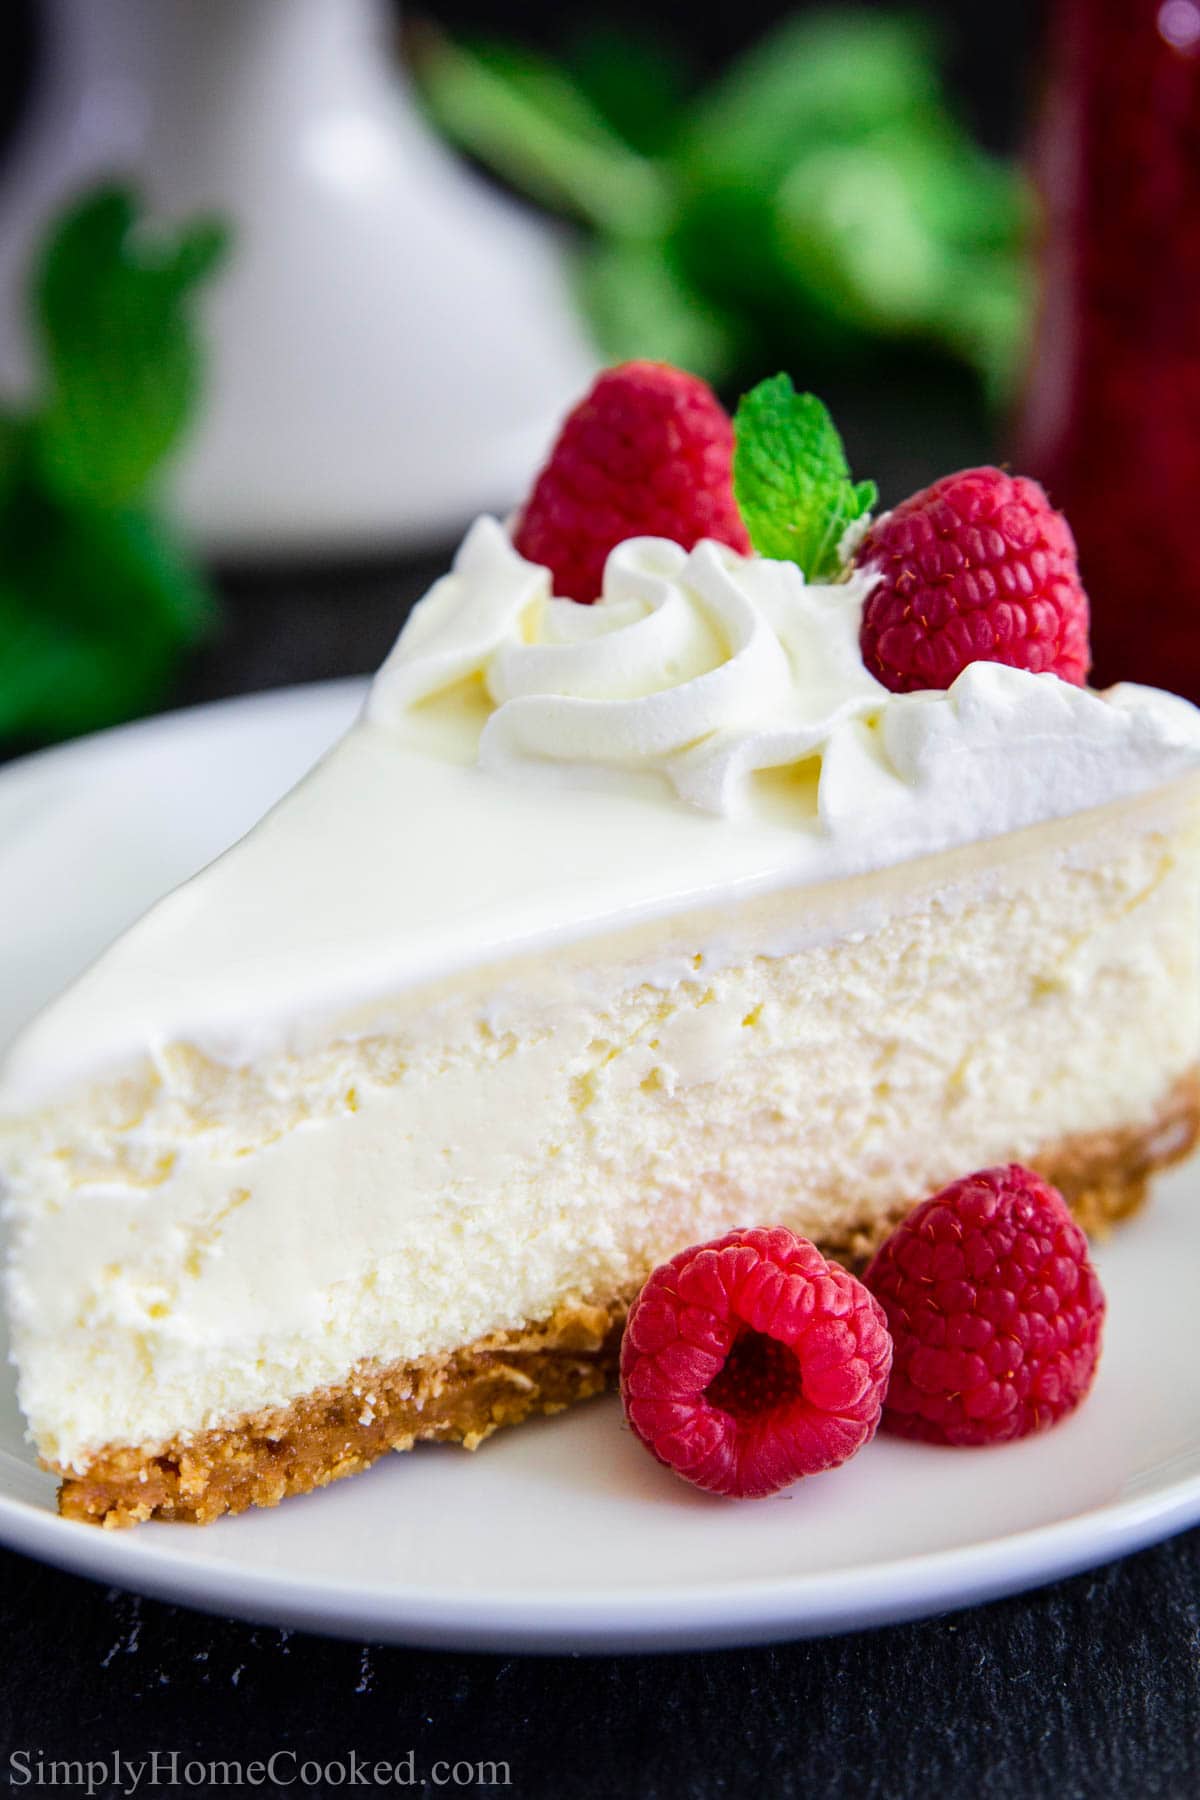 A slice of New York Style Cheesecake topped with whipped cream, fresh raspberries, and mint leaves on a white plate.